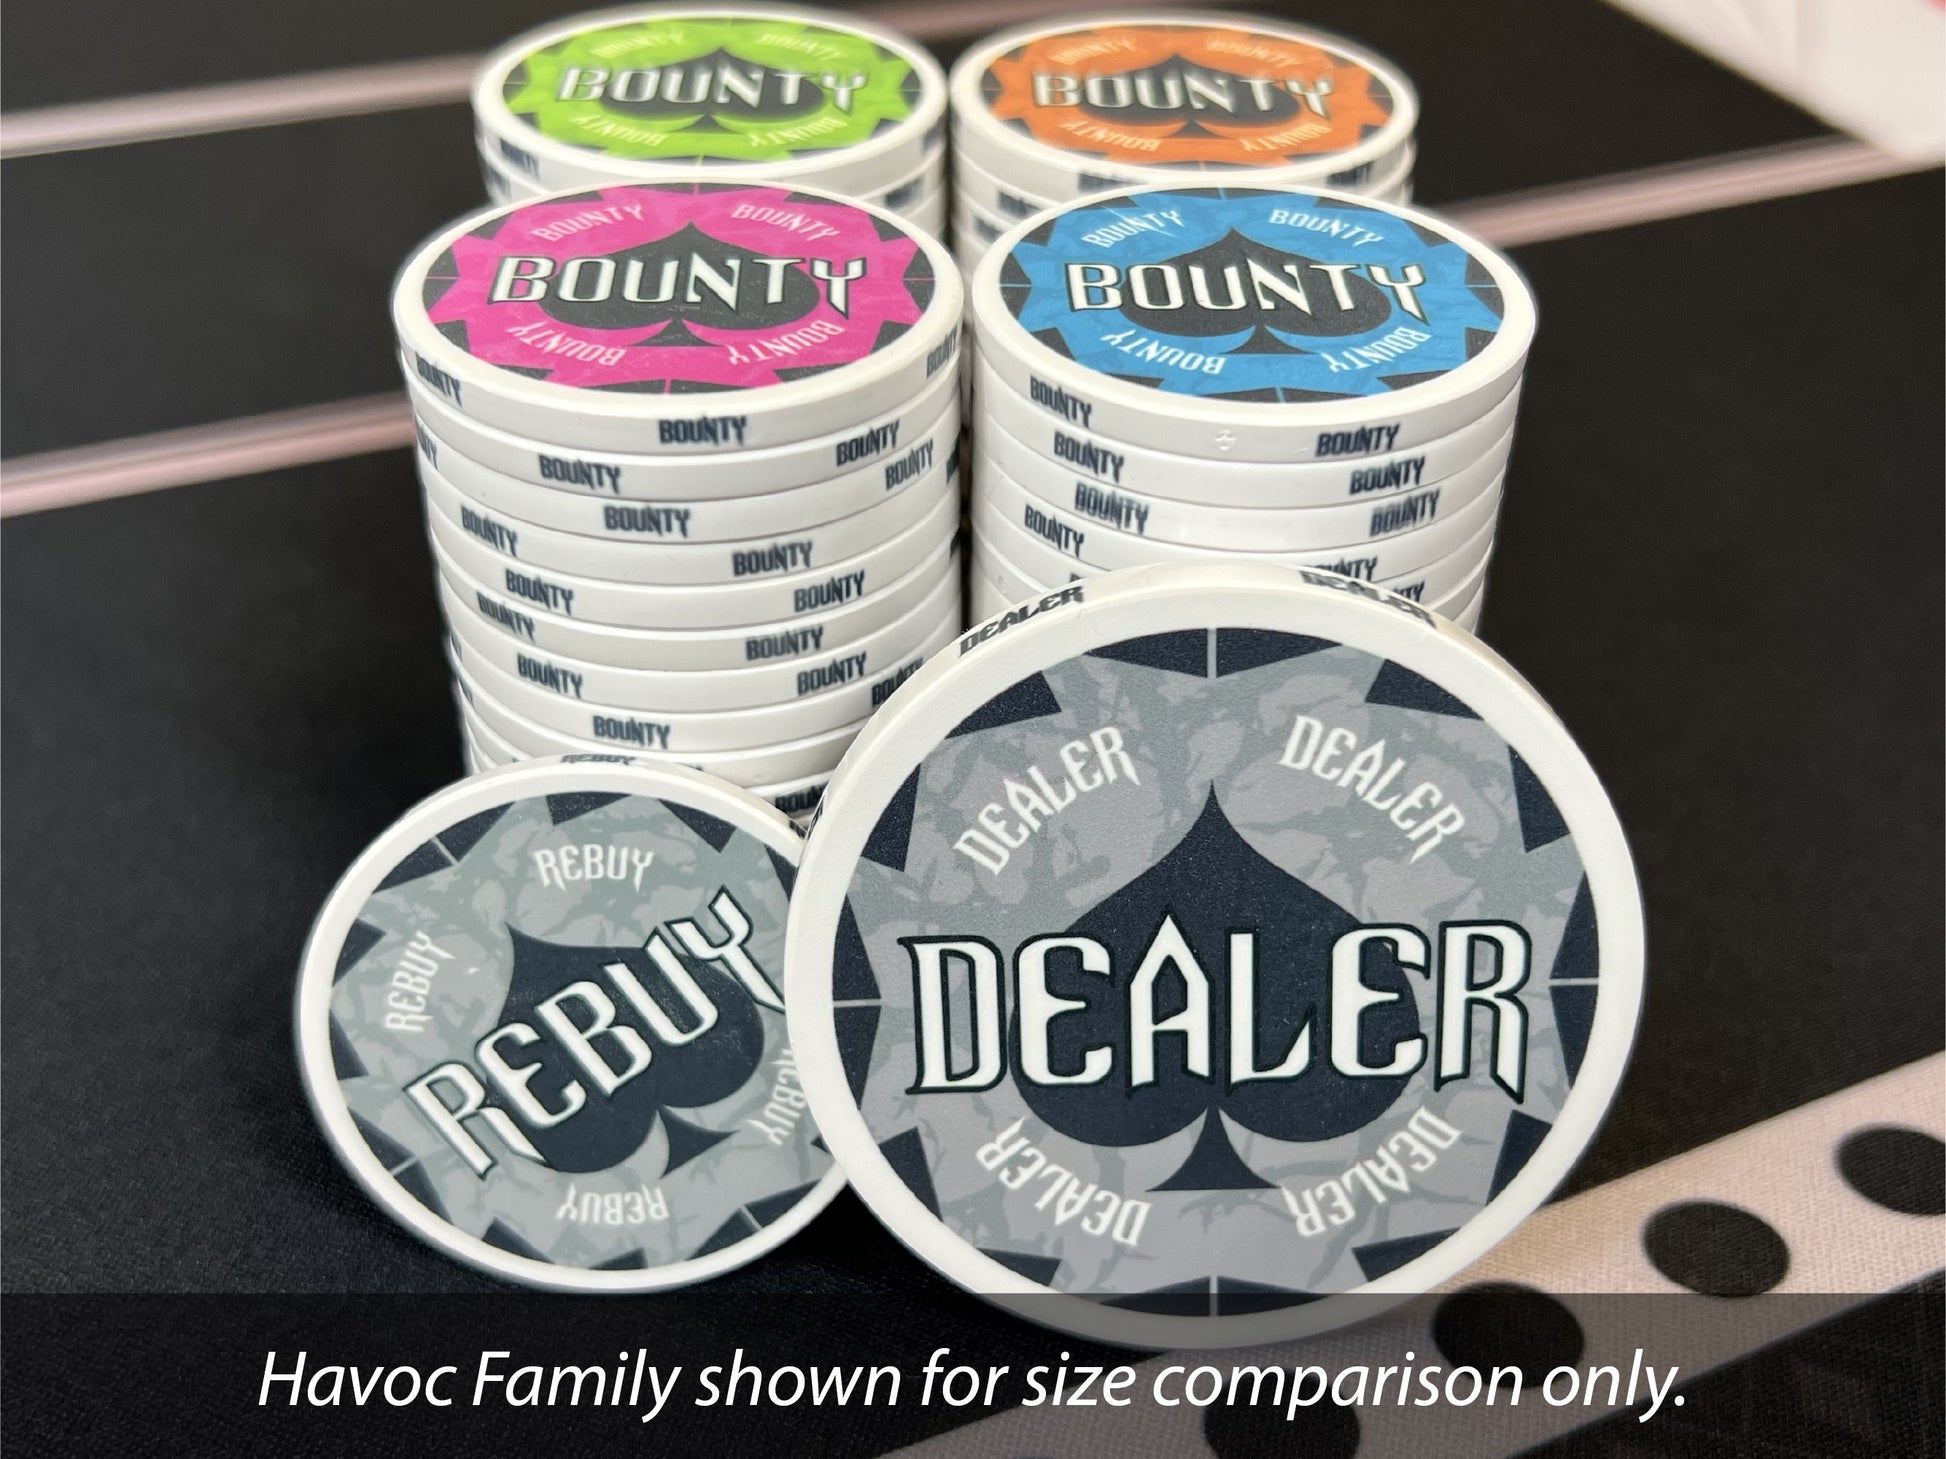 Also available for your Havoc Dealer Button: matching bounty chips and rebuy chips. Shown are the 43mm gray Havoc Rebuy Chip and the multi-colored 39mm Havoc Bounty Chips. A 49mm dealer button is also available, but not shown.